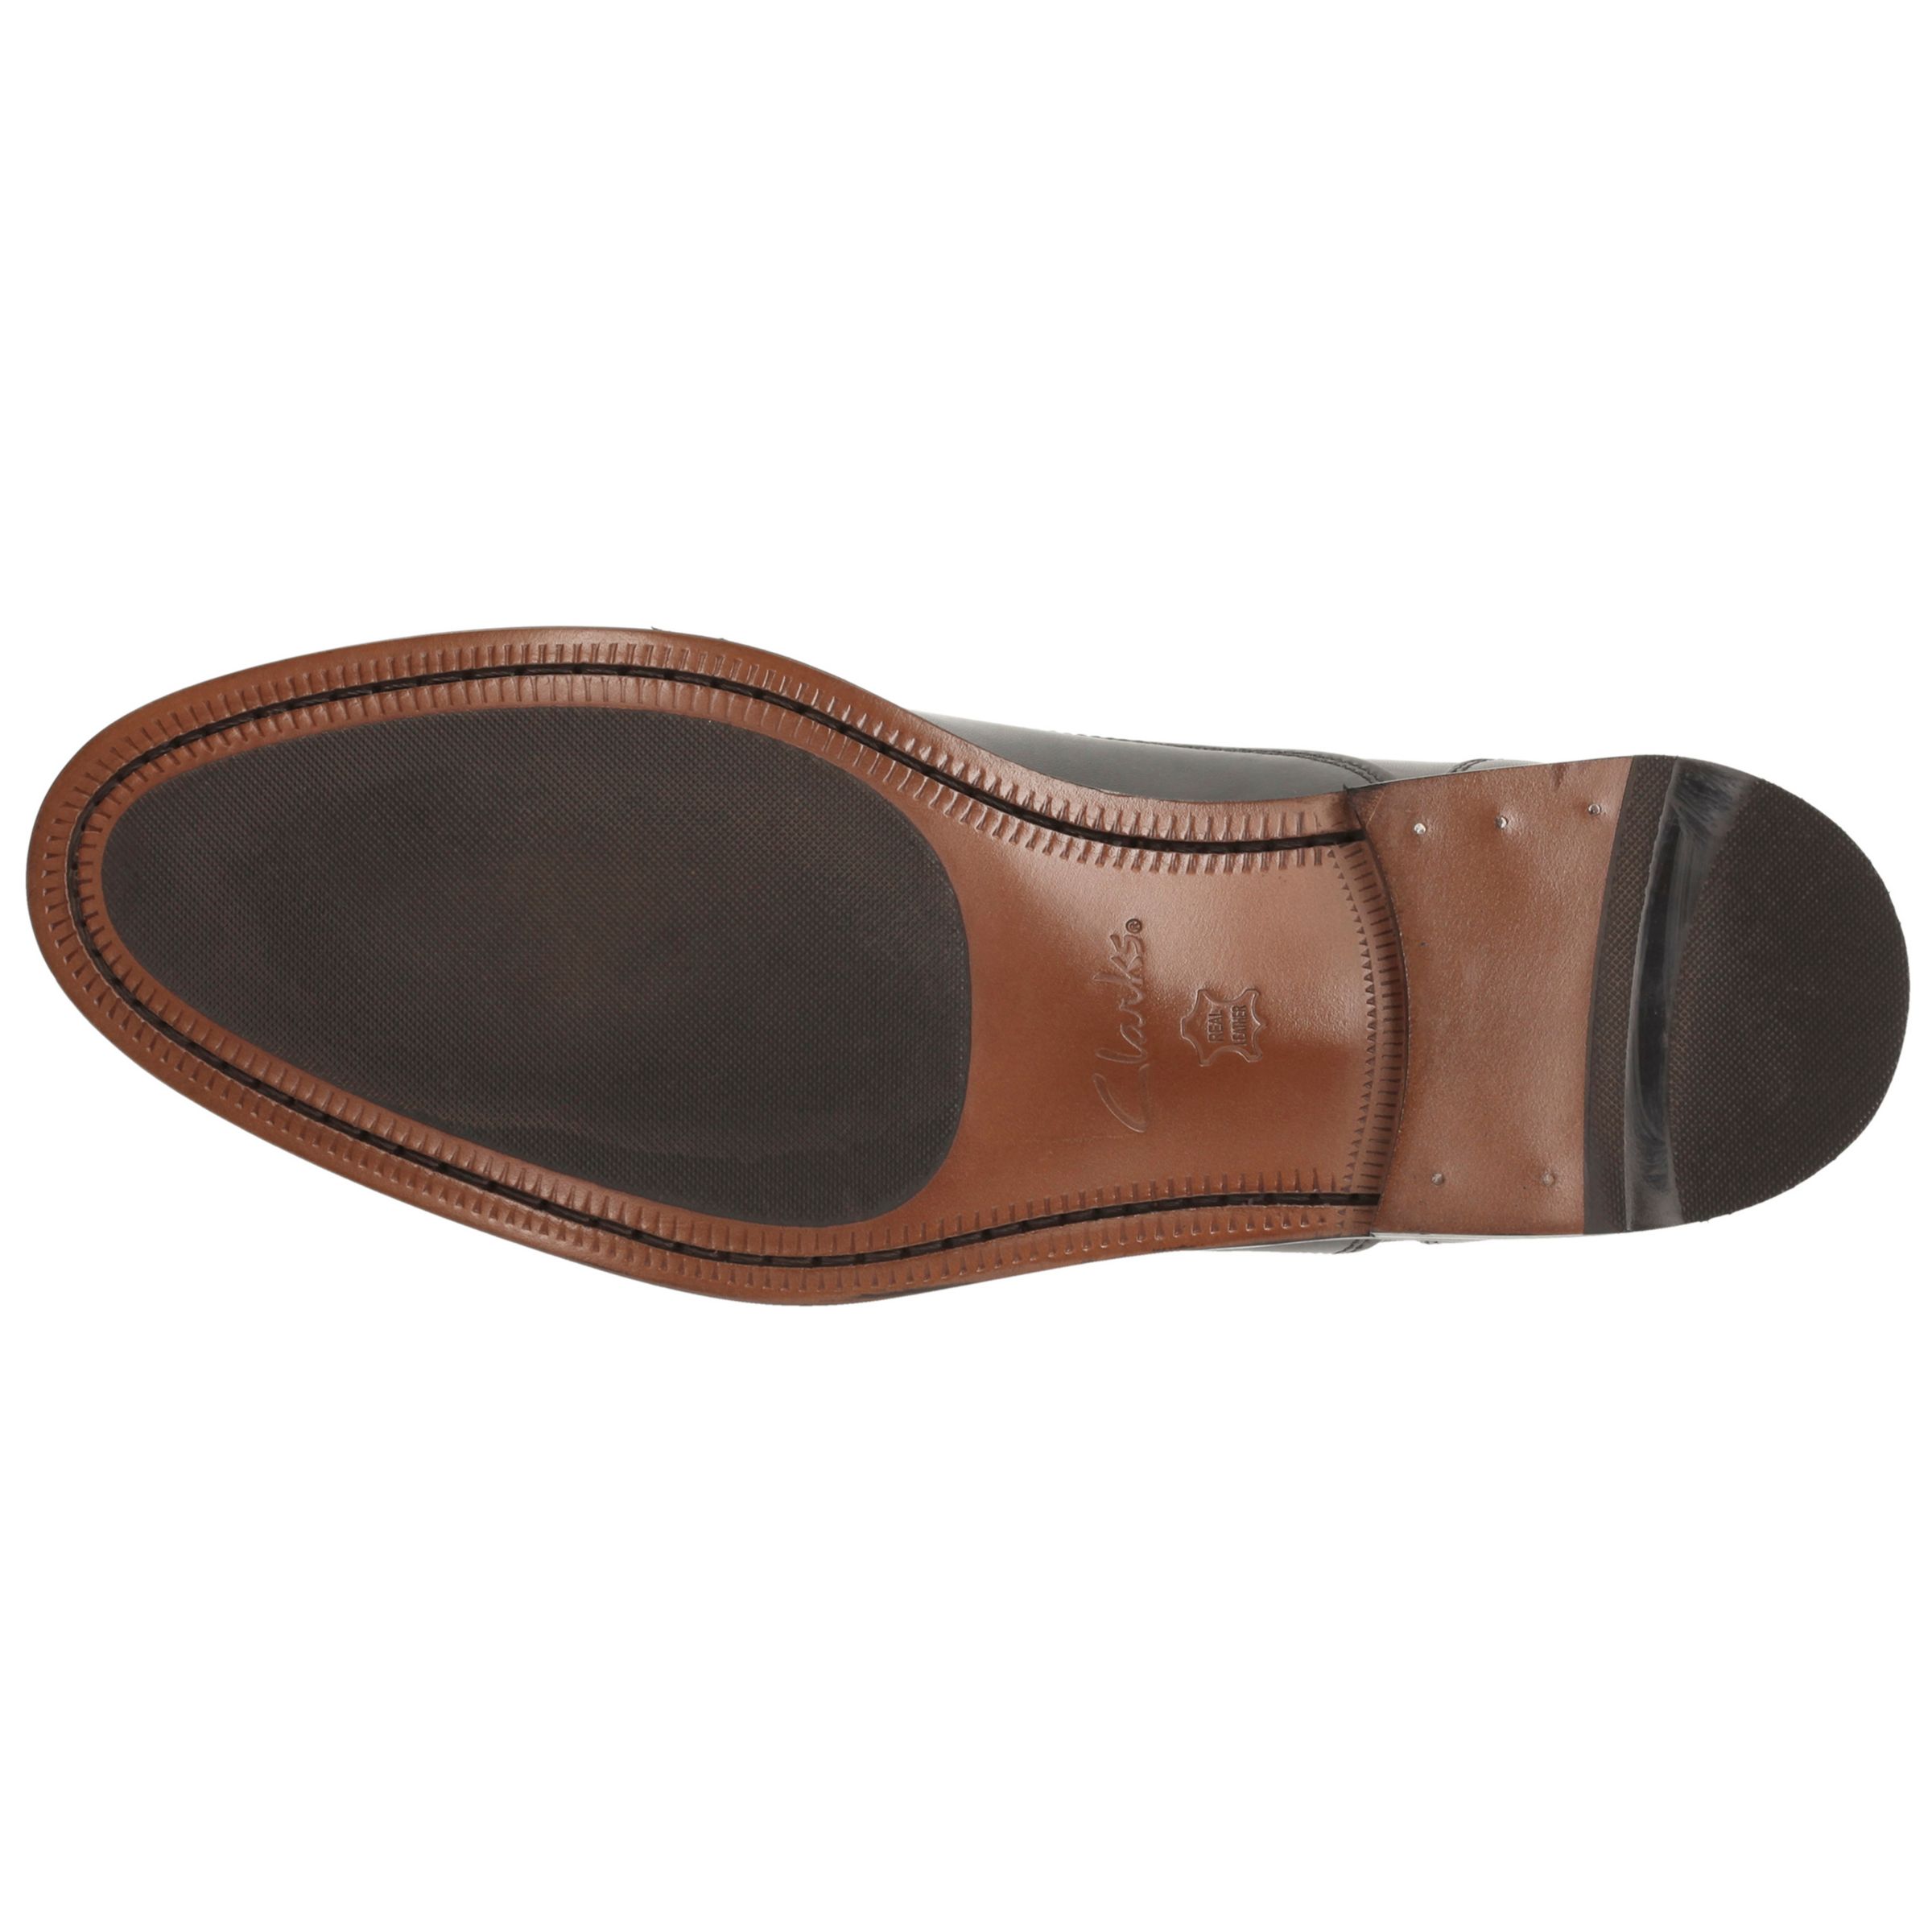 clarks coling boss brown